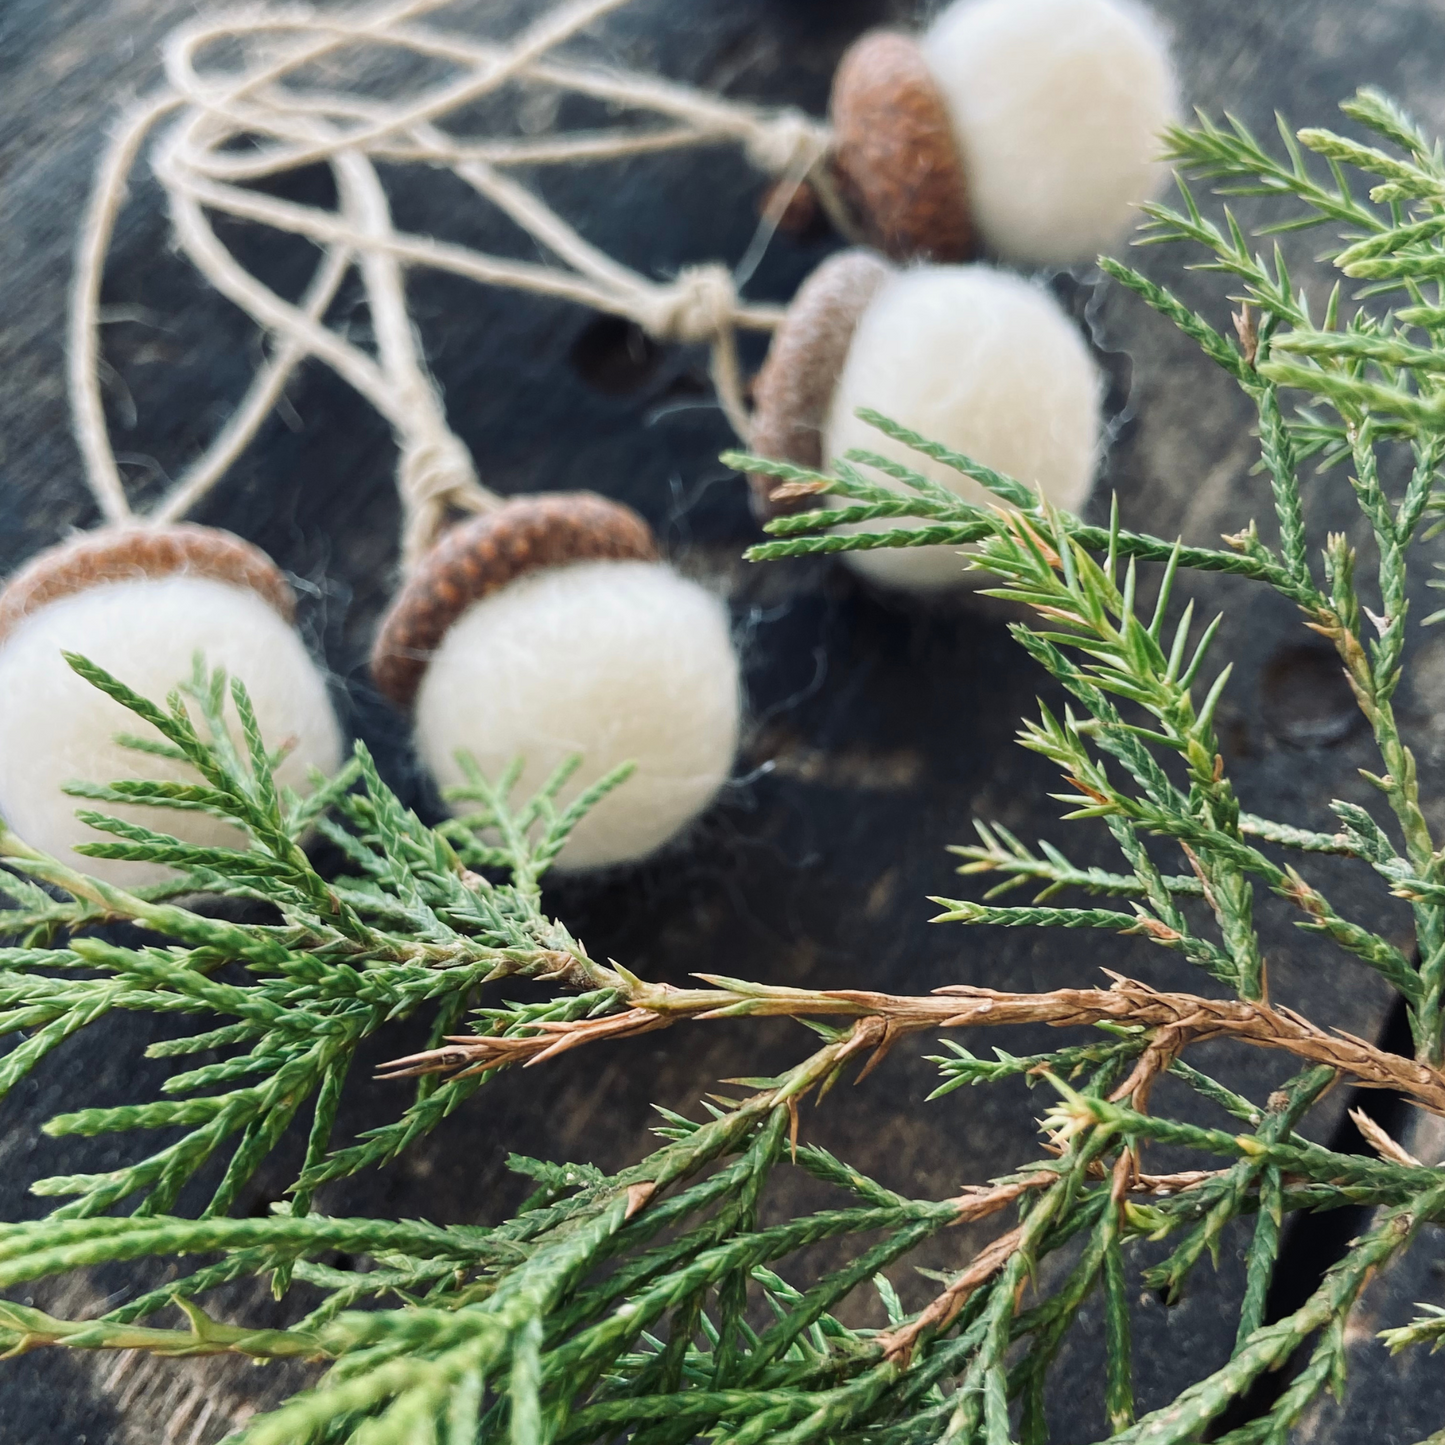 Felted Wool Acorn Ornaments with Red Oak Caps & Natural Hemp. Ivory or Tan